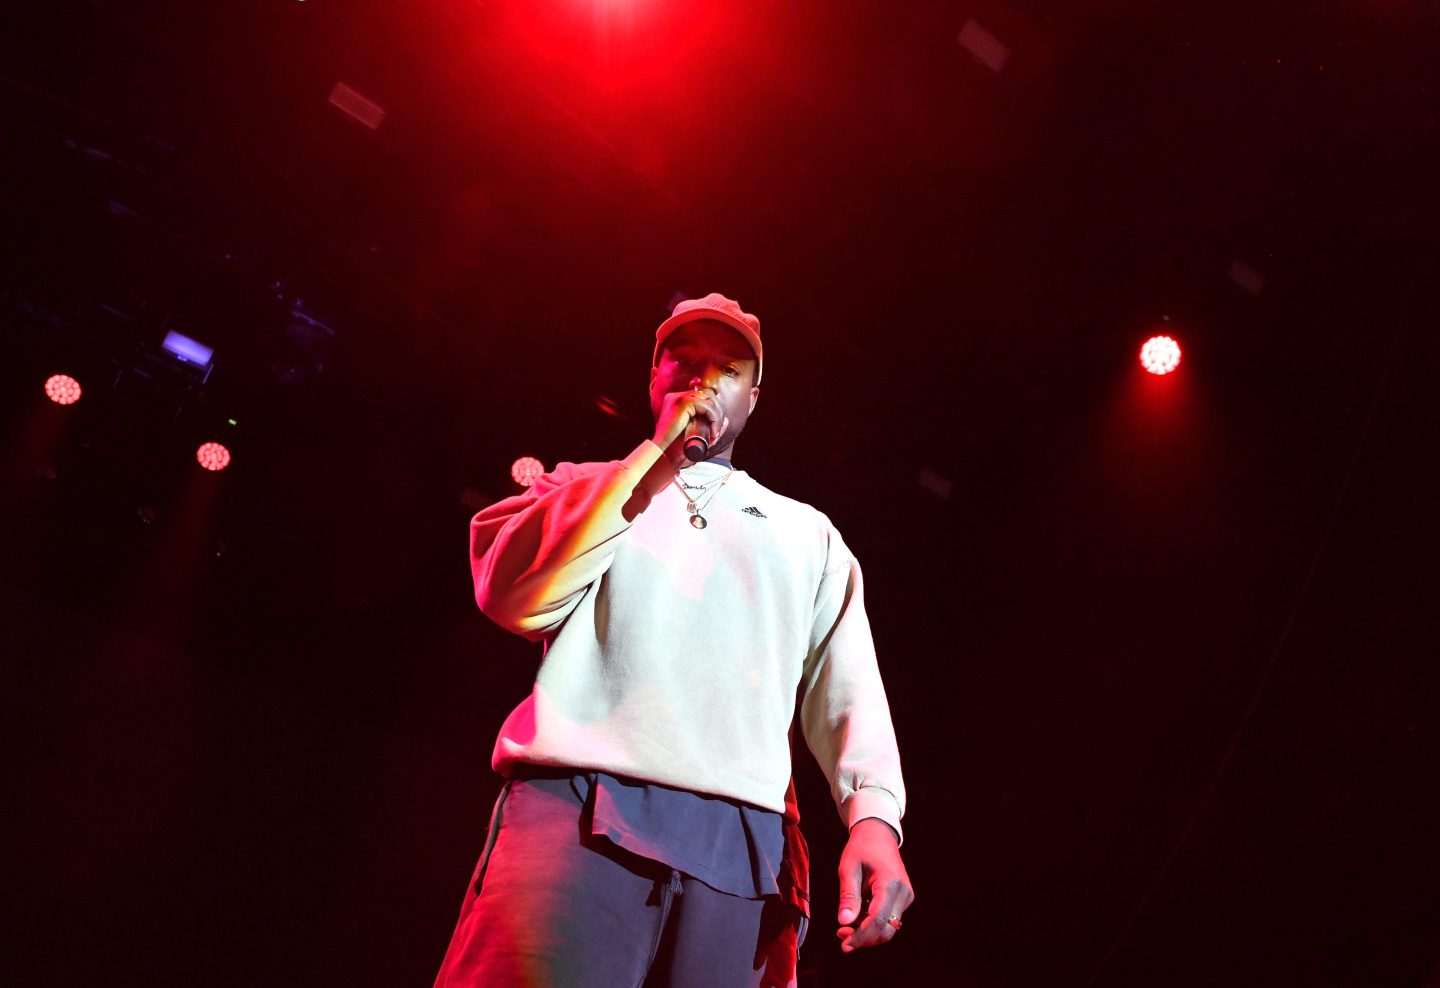 Kanye West appears onstage at an Adidas Creates 747 Warehouse event wearing an Adidas sweatshirt.